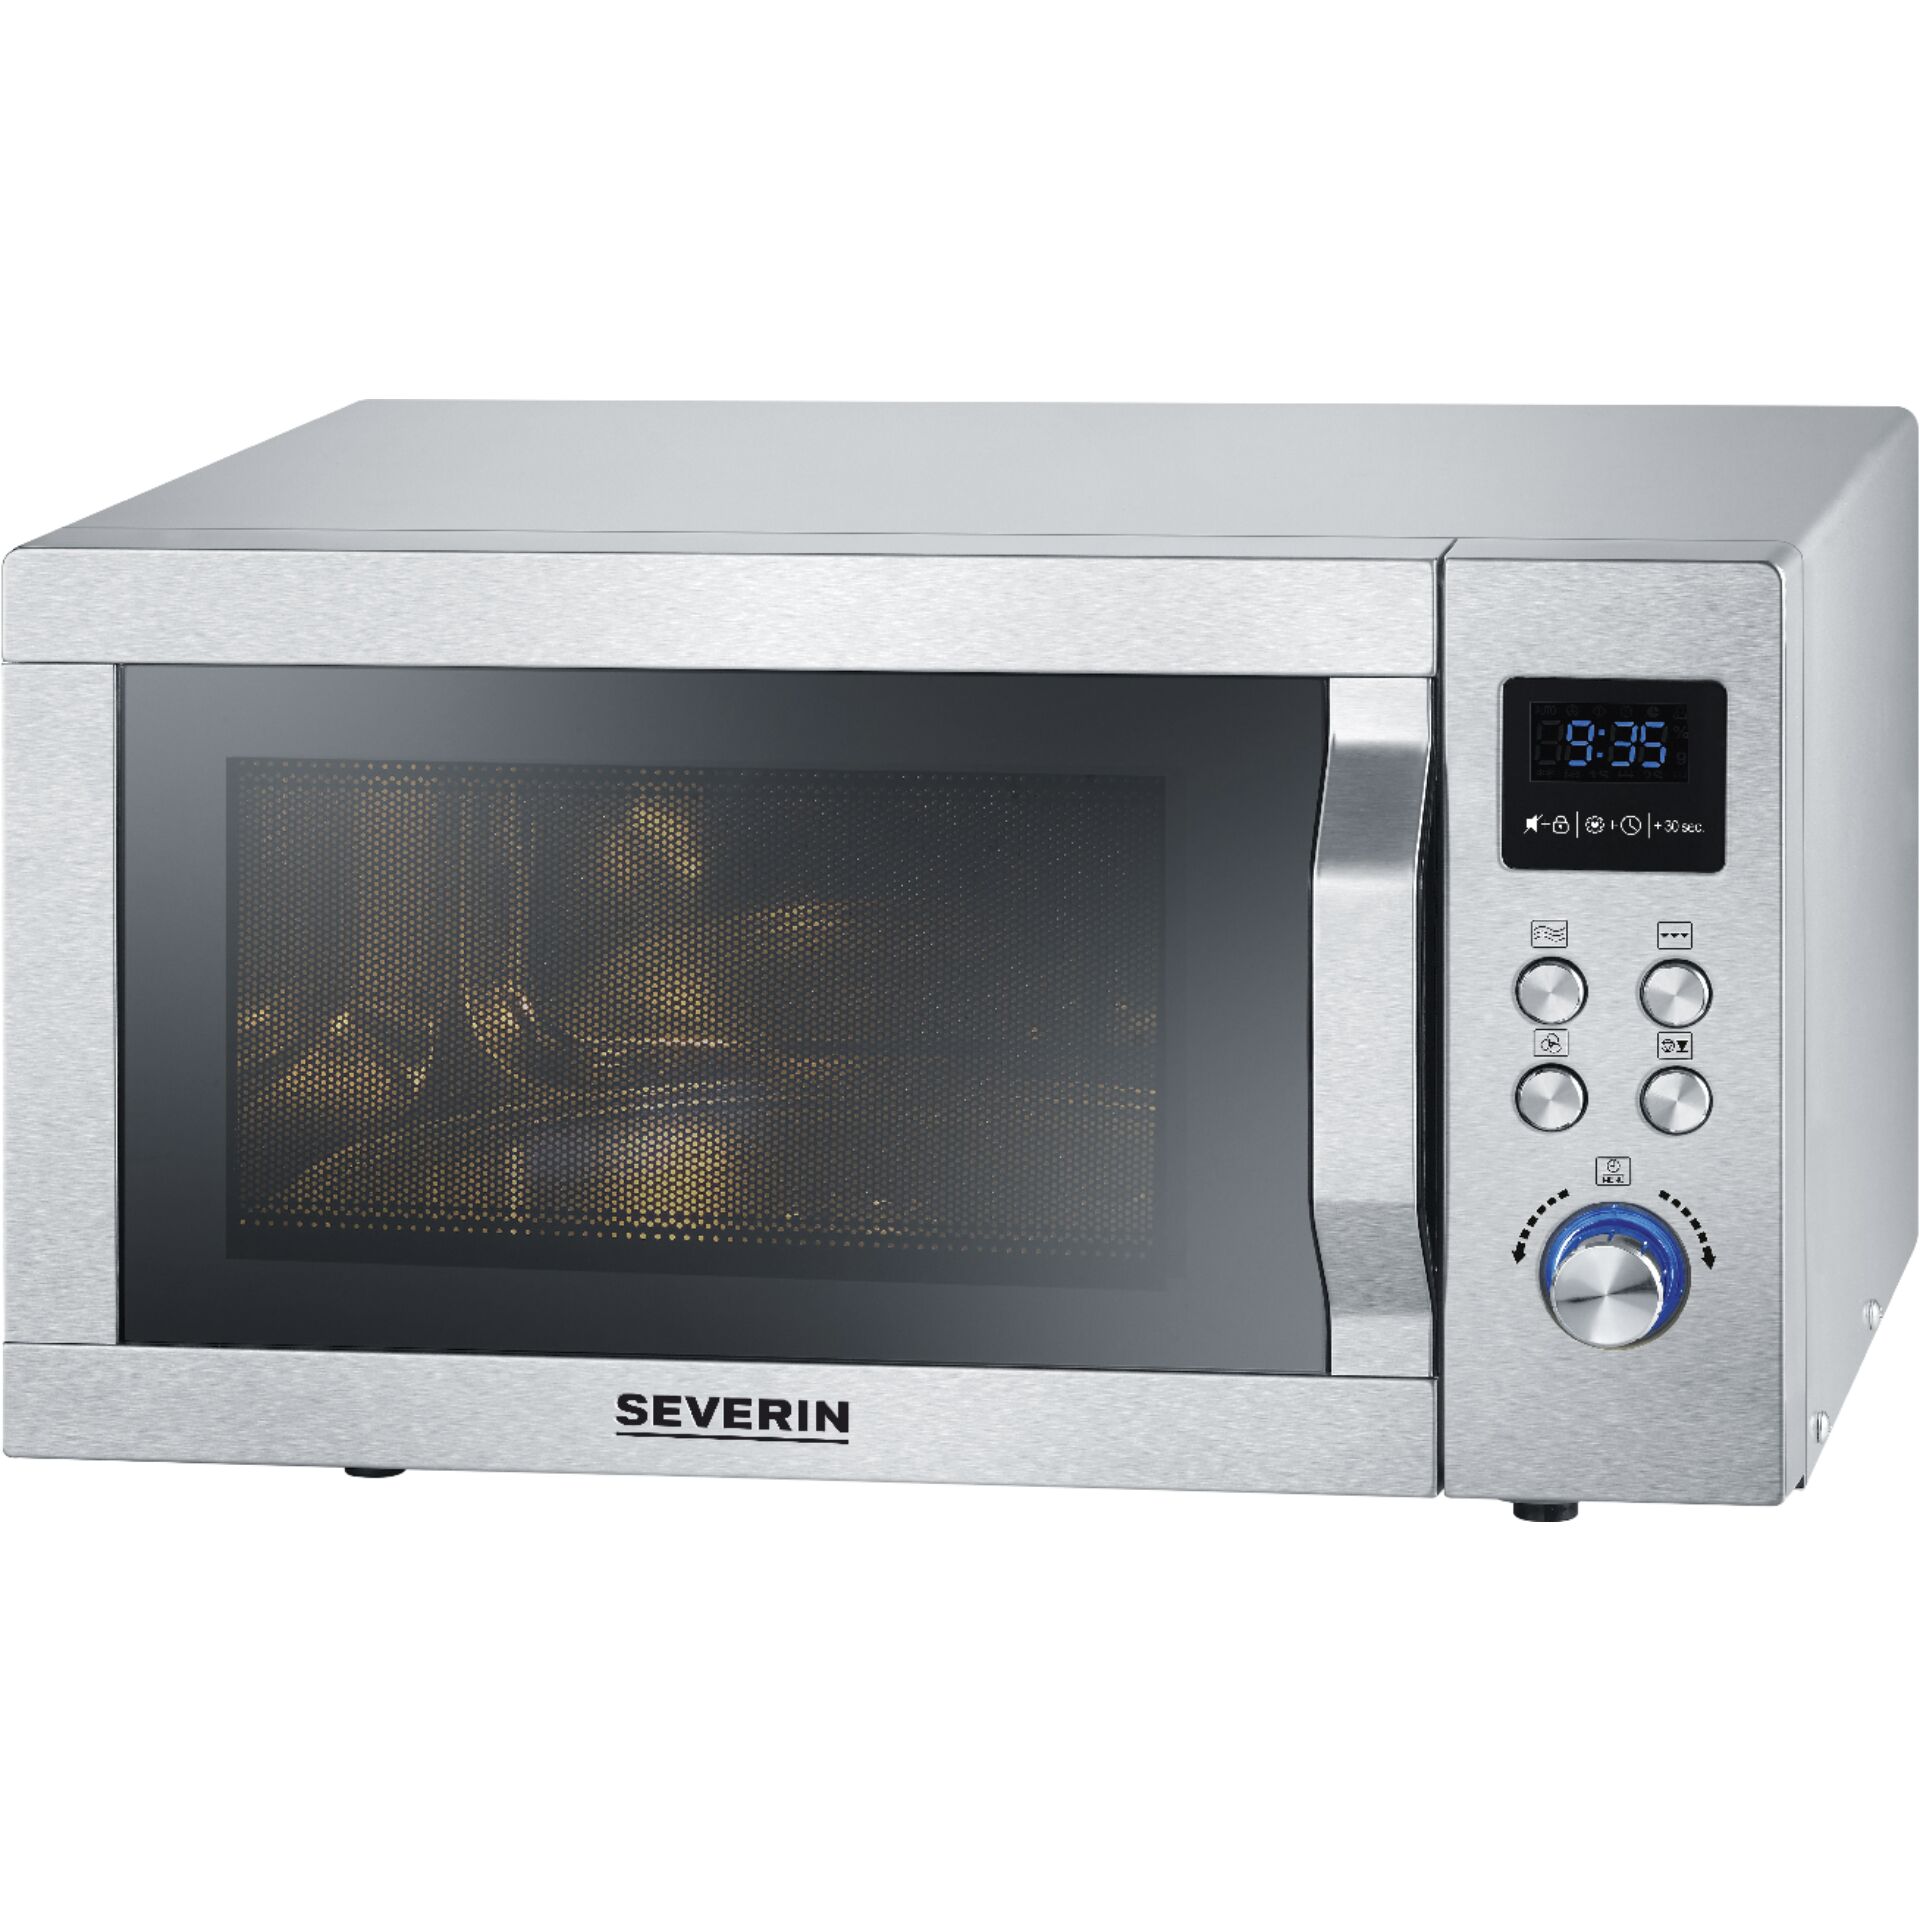 Severin -Severin in mit Hardware/Electronic 3 1 Mikrowelle Grill -MW 7774